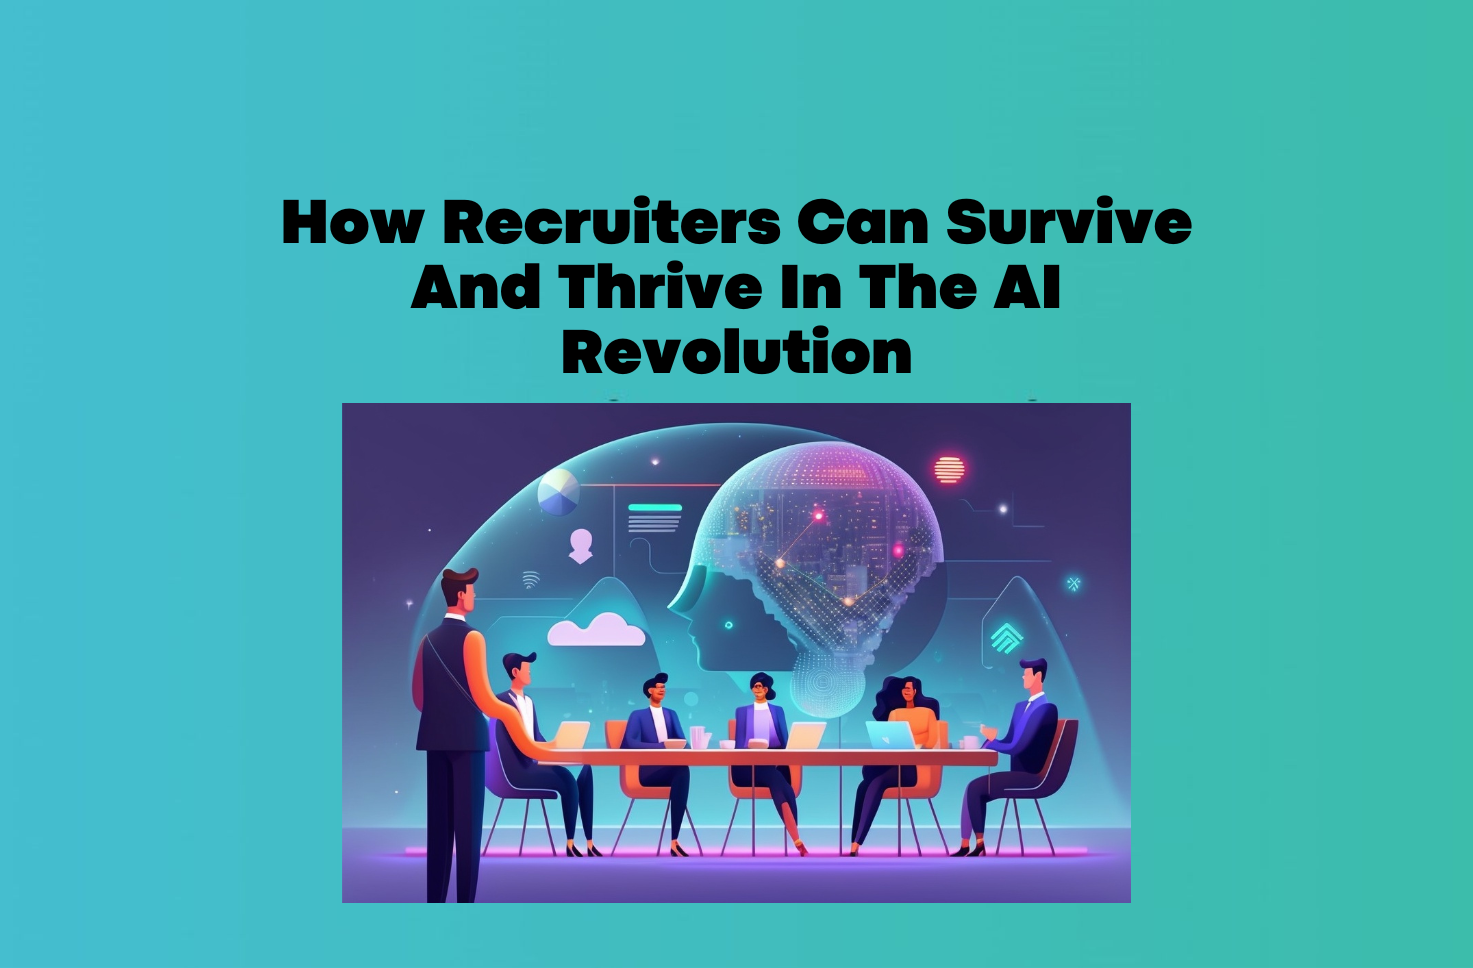 How recruiters can survive and thrive in the AI revolution